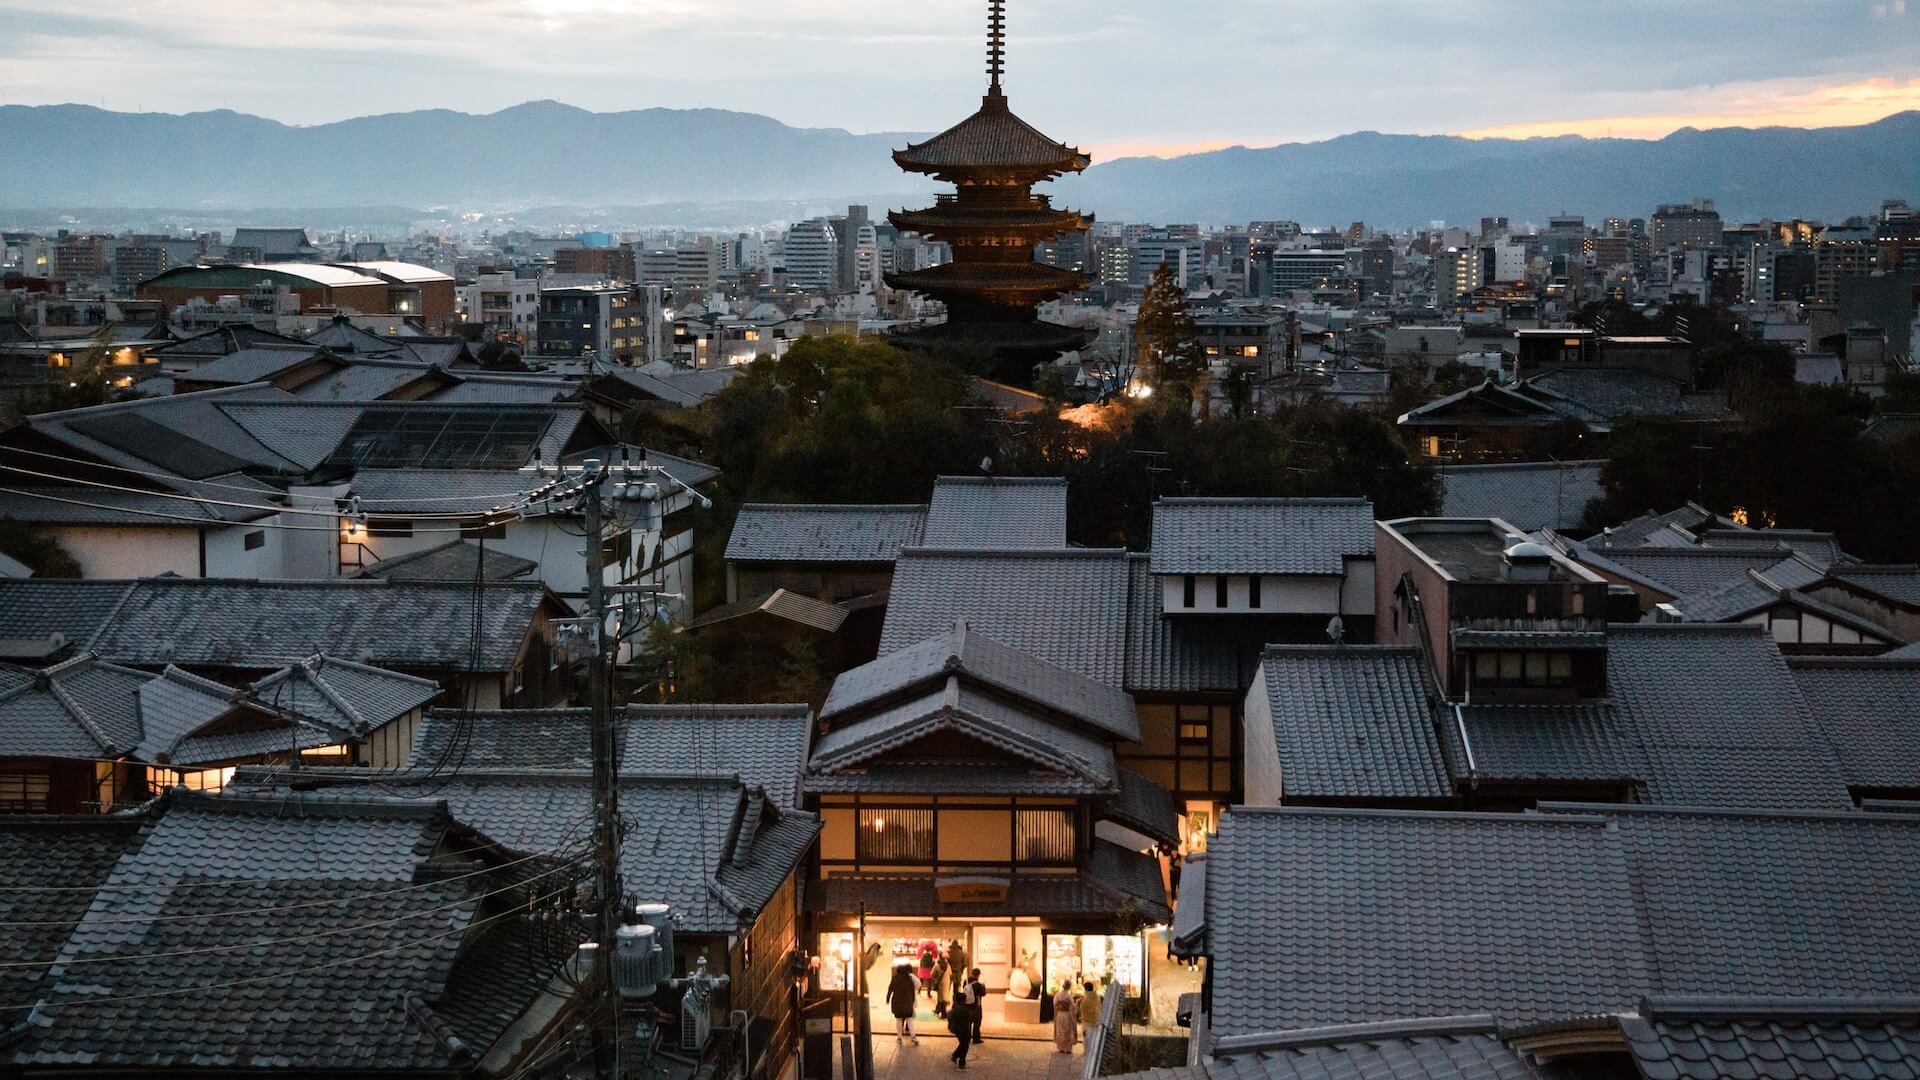 Kyoto: The Japanese Metropolis Where Ancient Traditions Live On